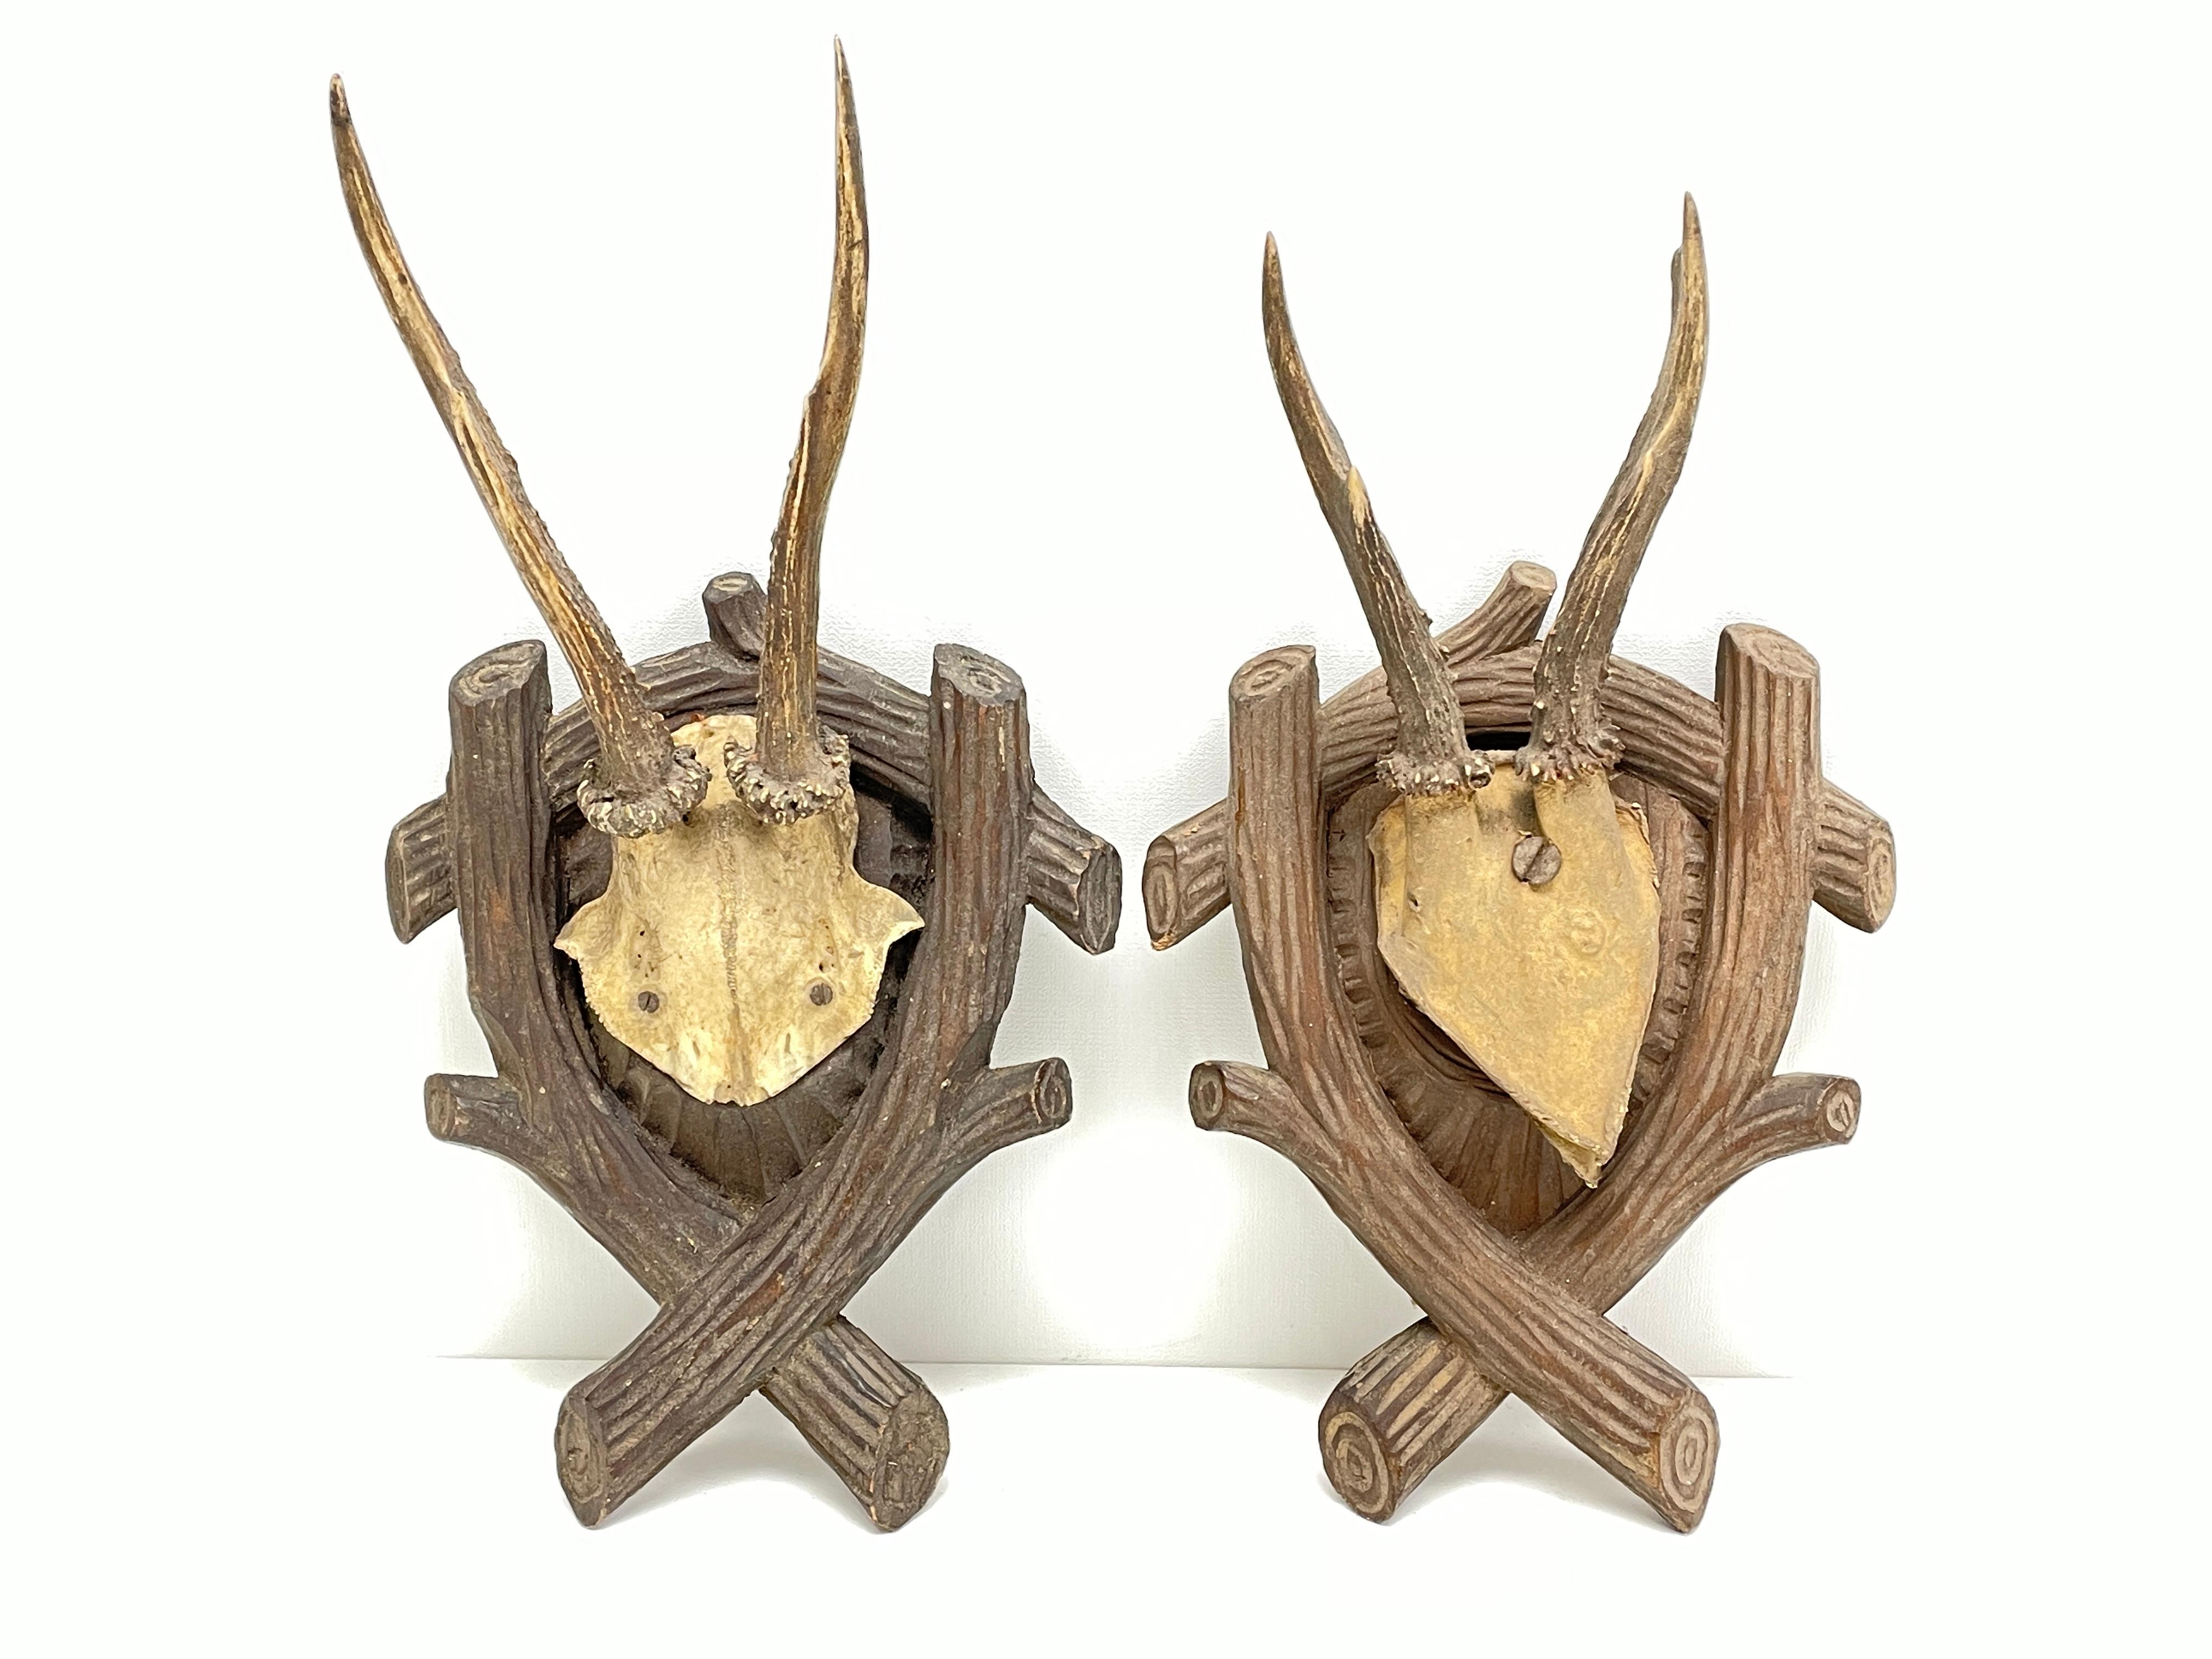 A set of two Antique black forest deer antler trophies on hand carved, Black Forest wooden plaques. I think they are from the 1890s or older. Tallest is approximate 12 1/2